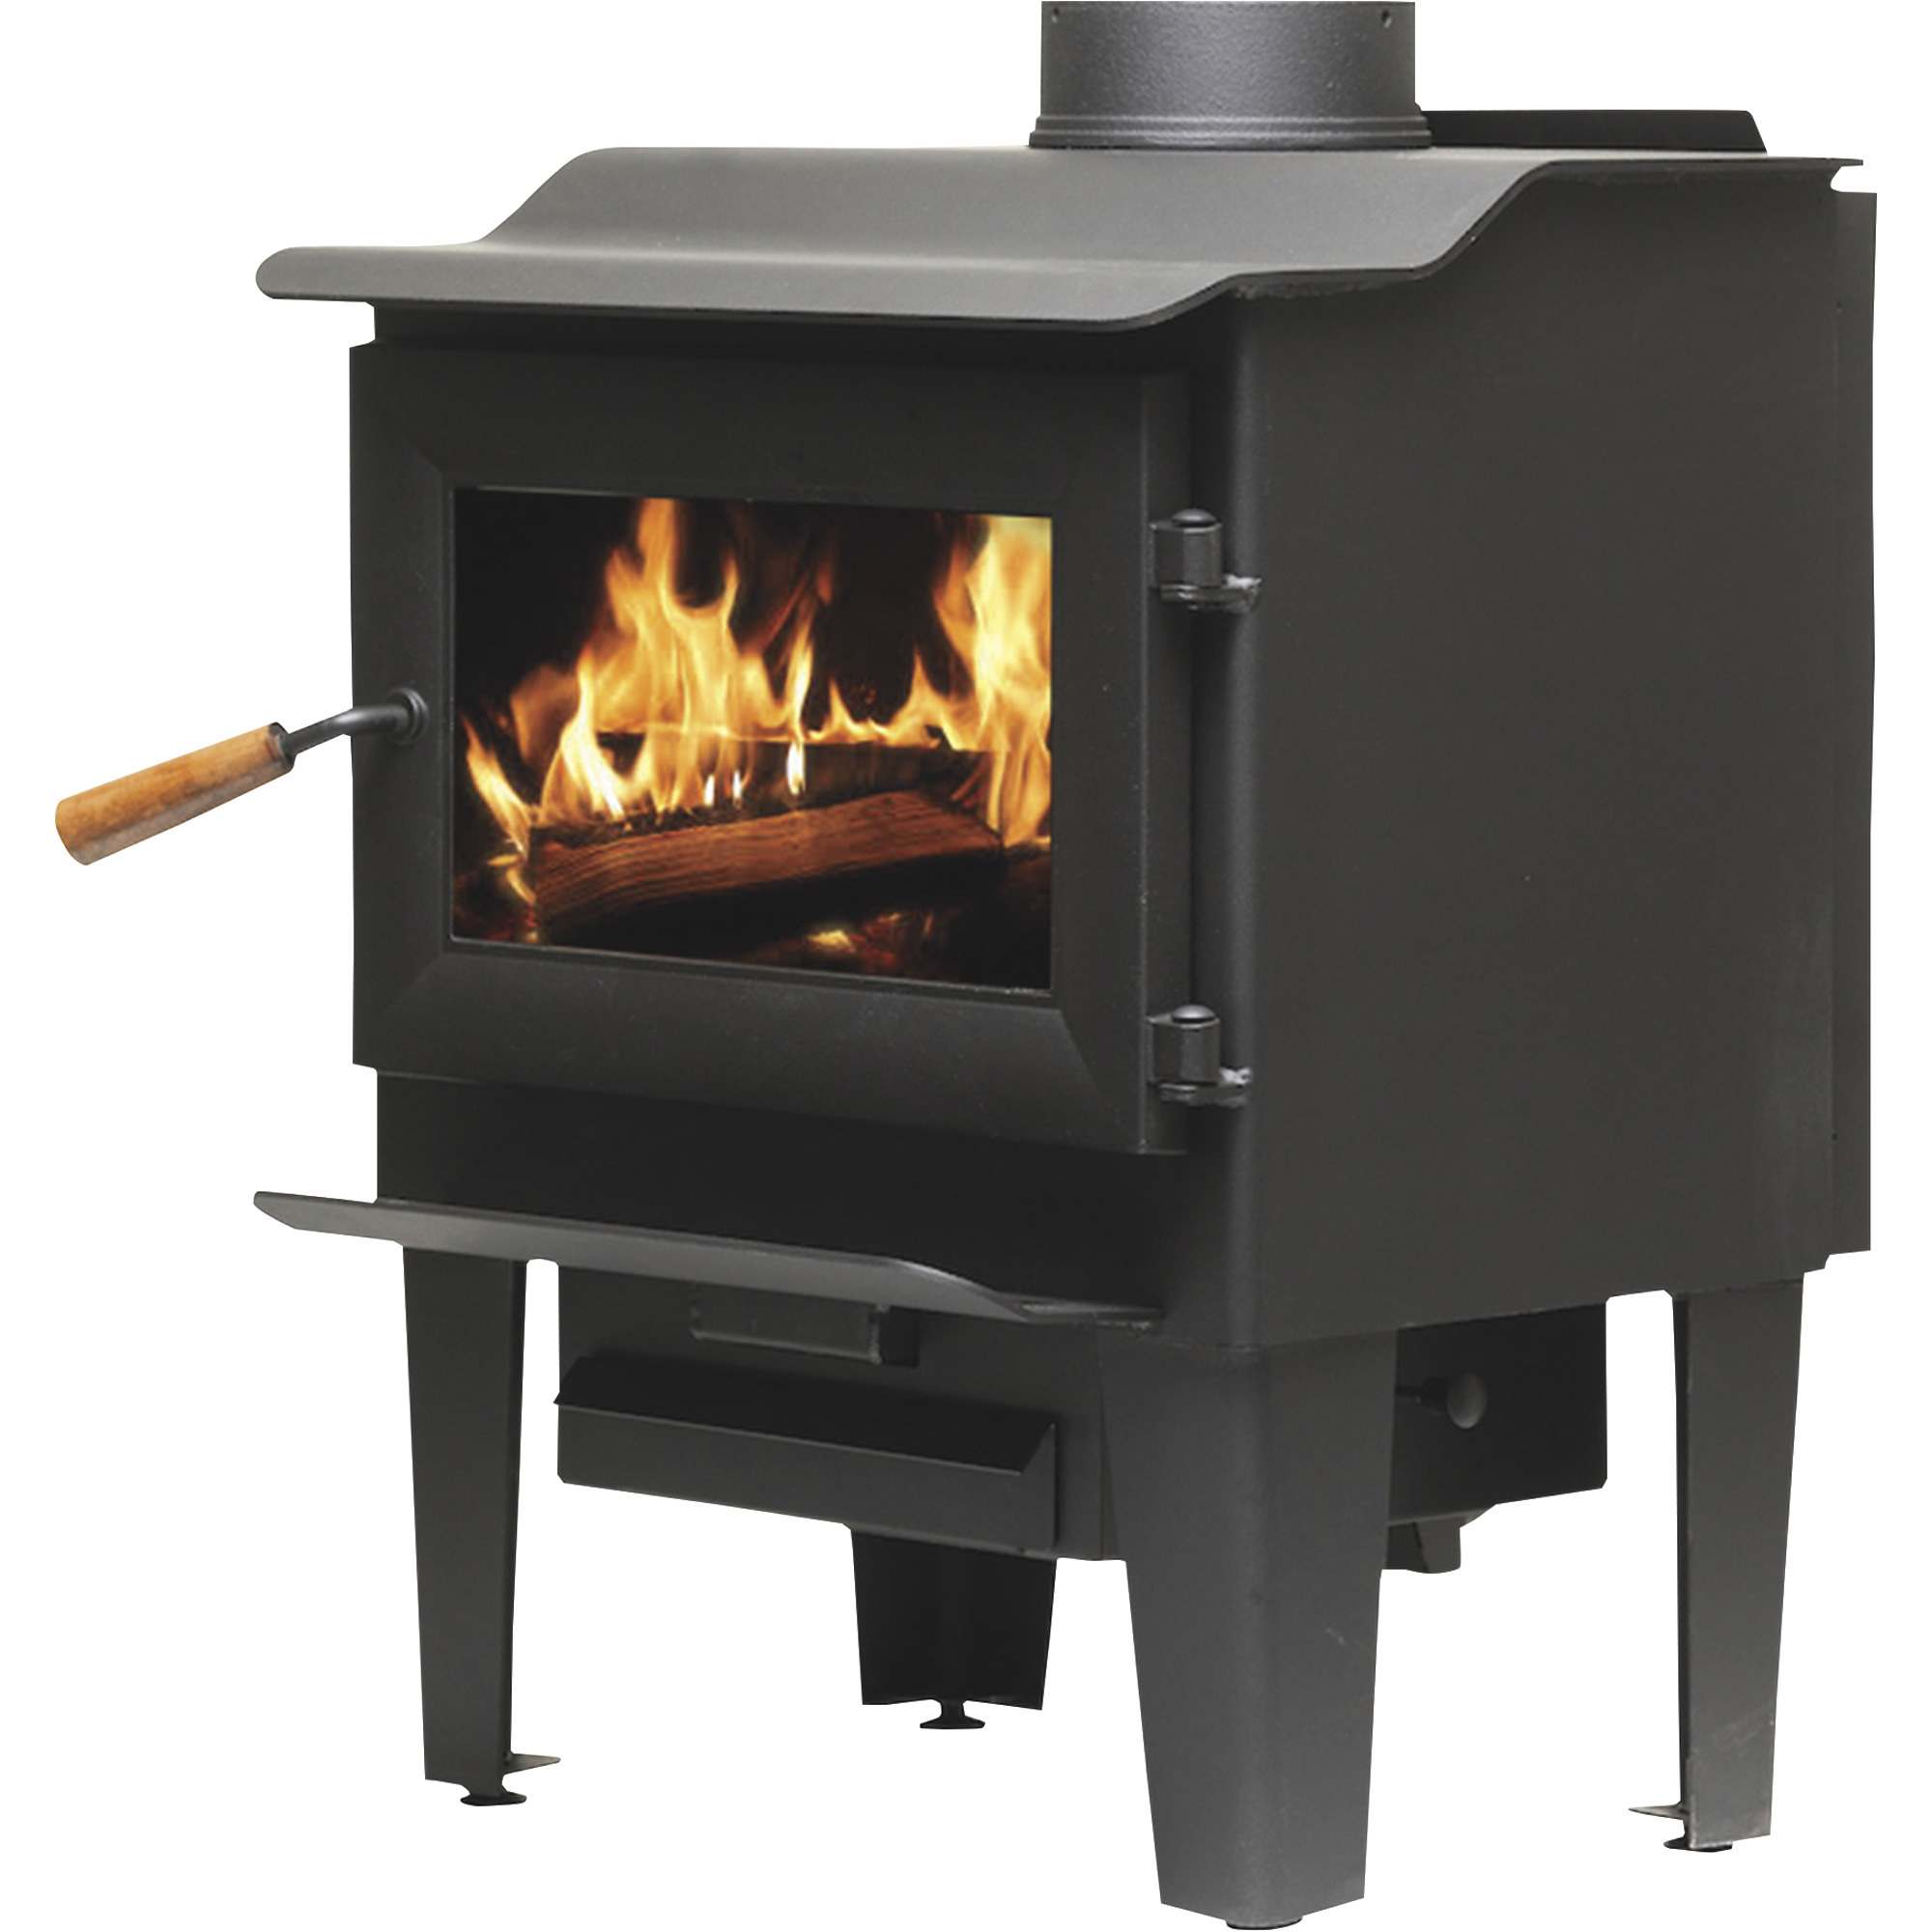 Vogelzang Plate Steel Wood Stove with Blower â 68,000 BTU, EPA 2020 Certified, Model VG1120E-BL